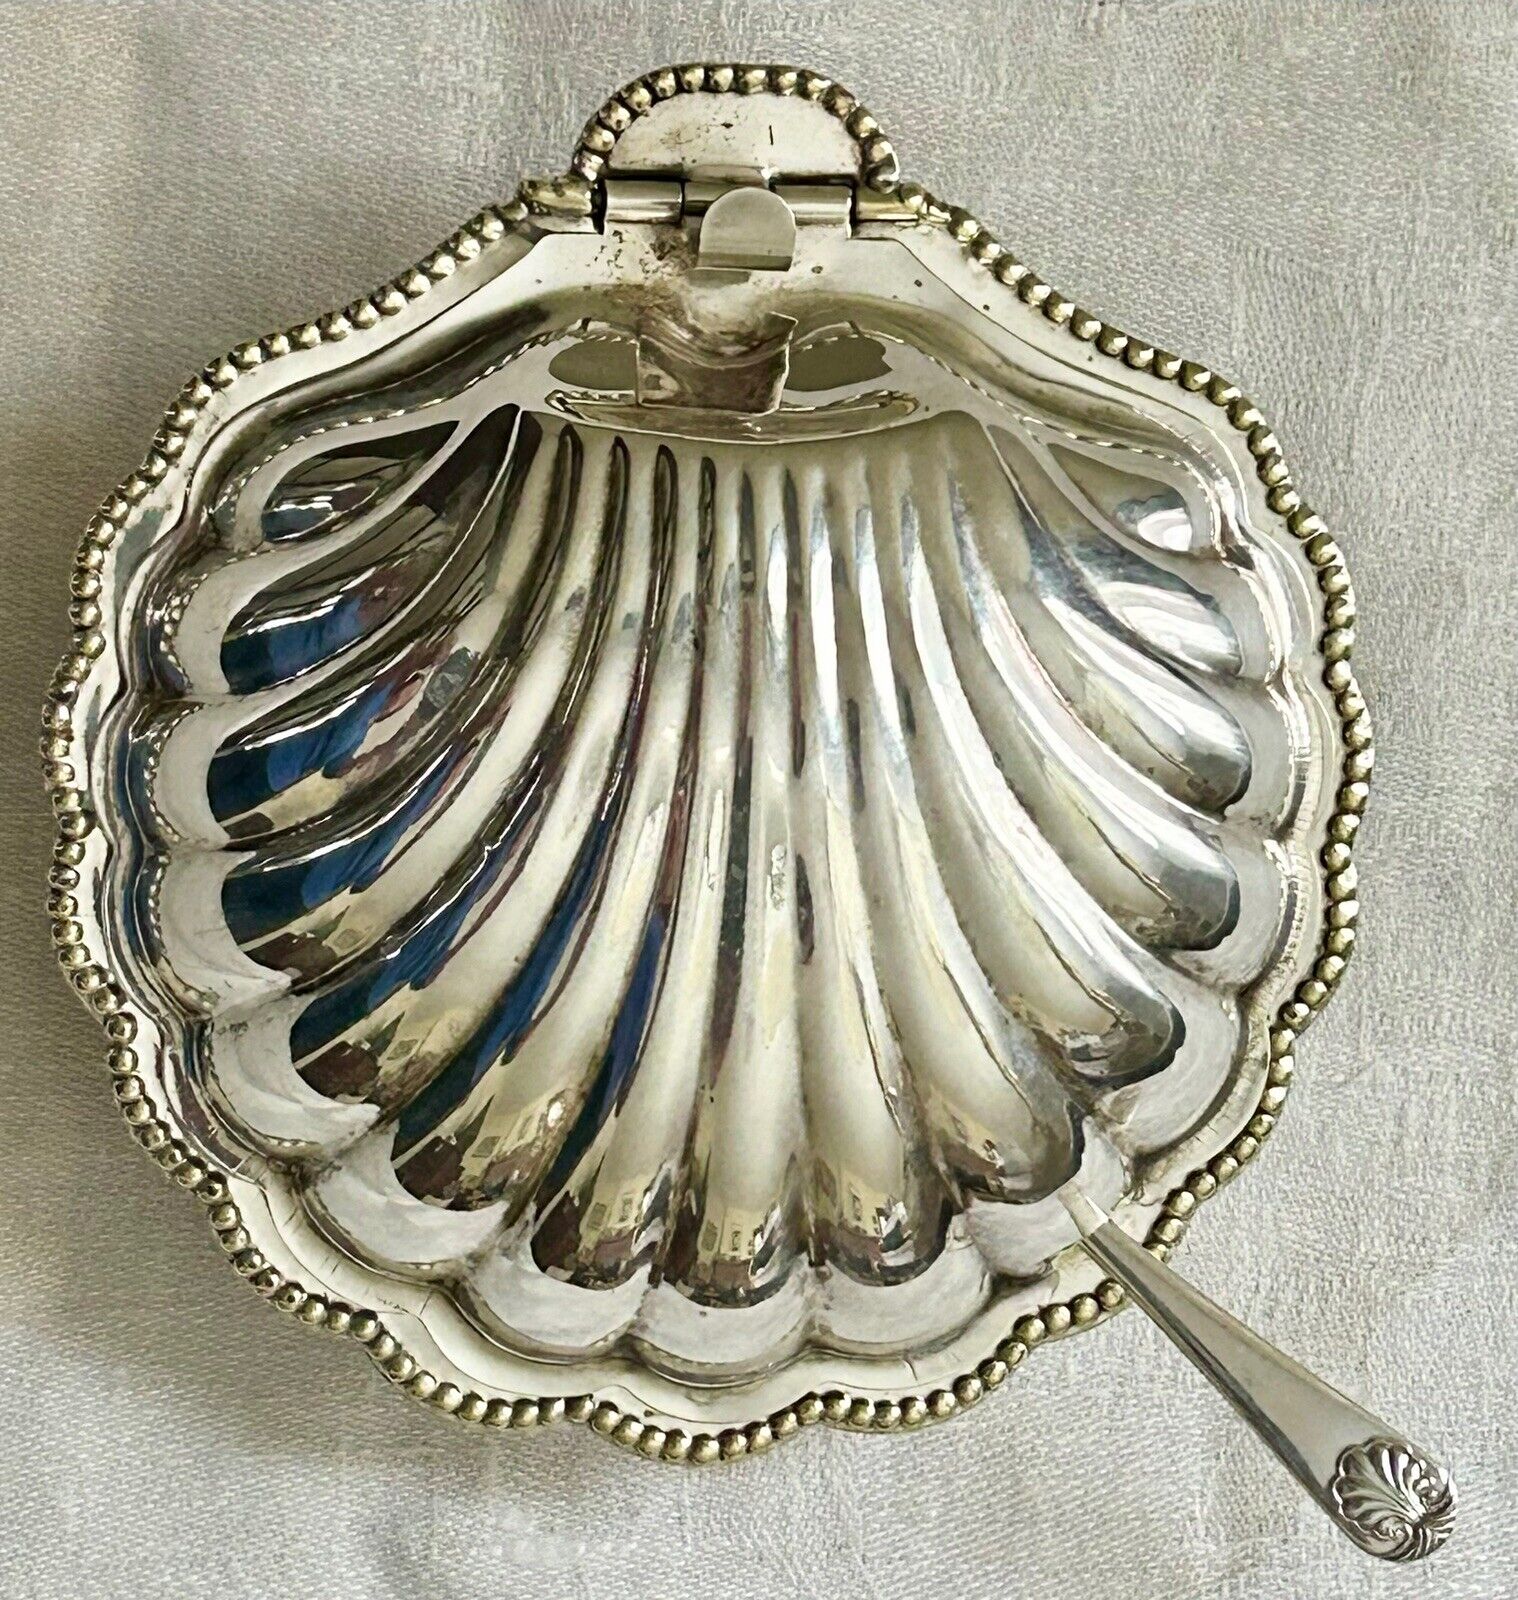 Silver-plated Shell Butter Caviar Dish w/ Glass Insert  by EPBR and E & d. Leek